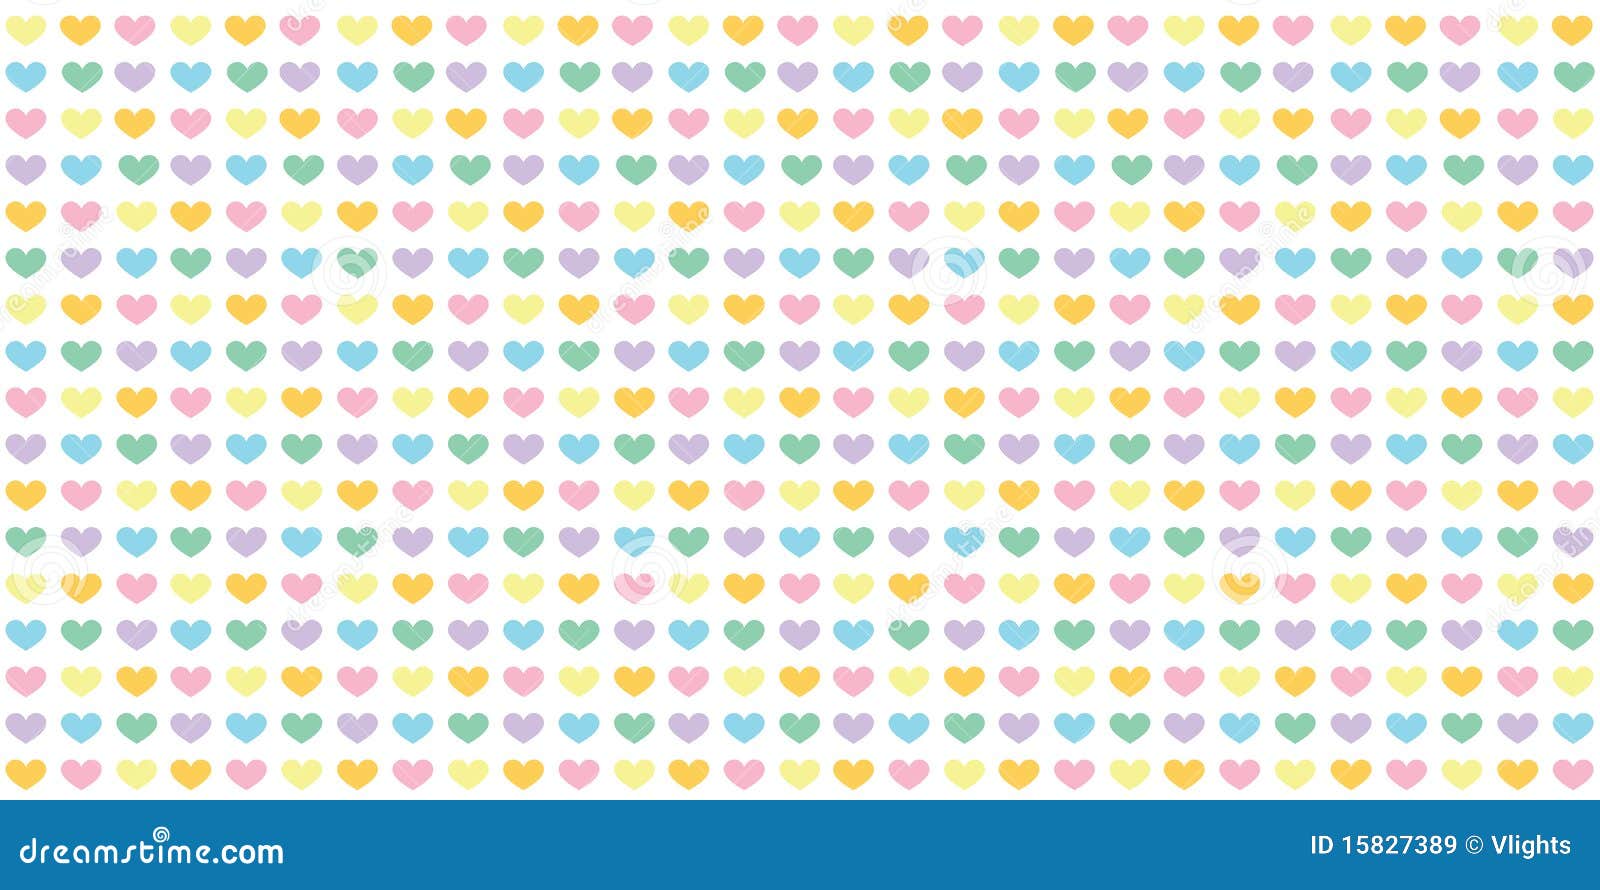 Page 10 - Free and customizable heart wallpaper templates